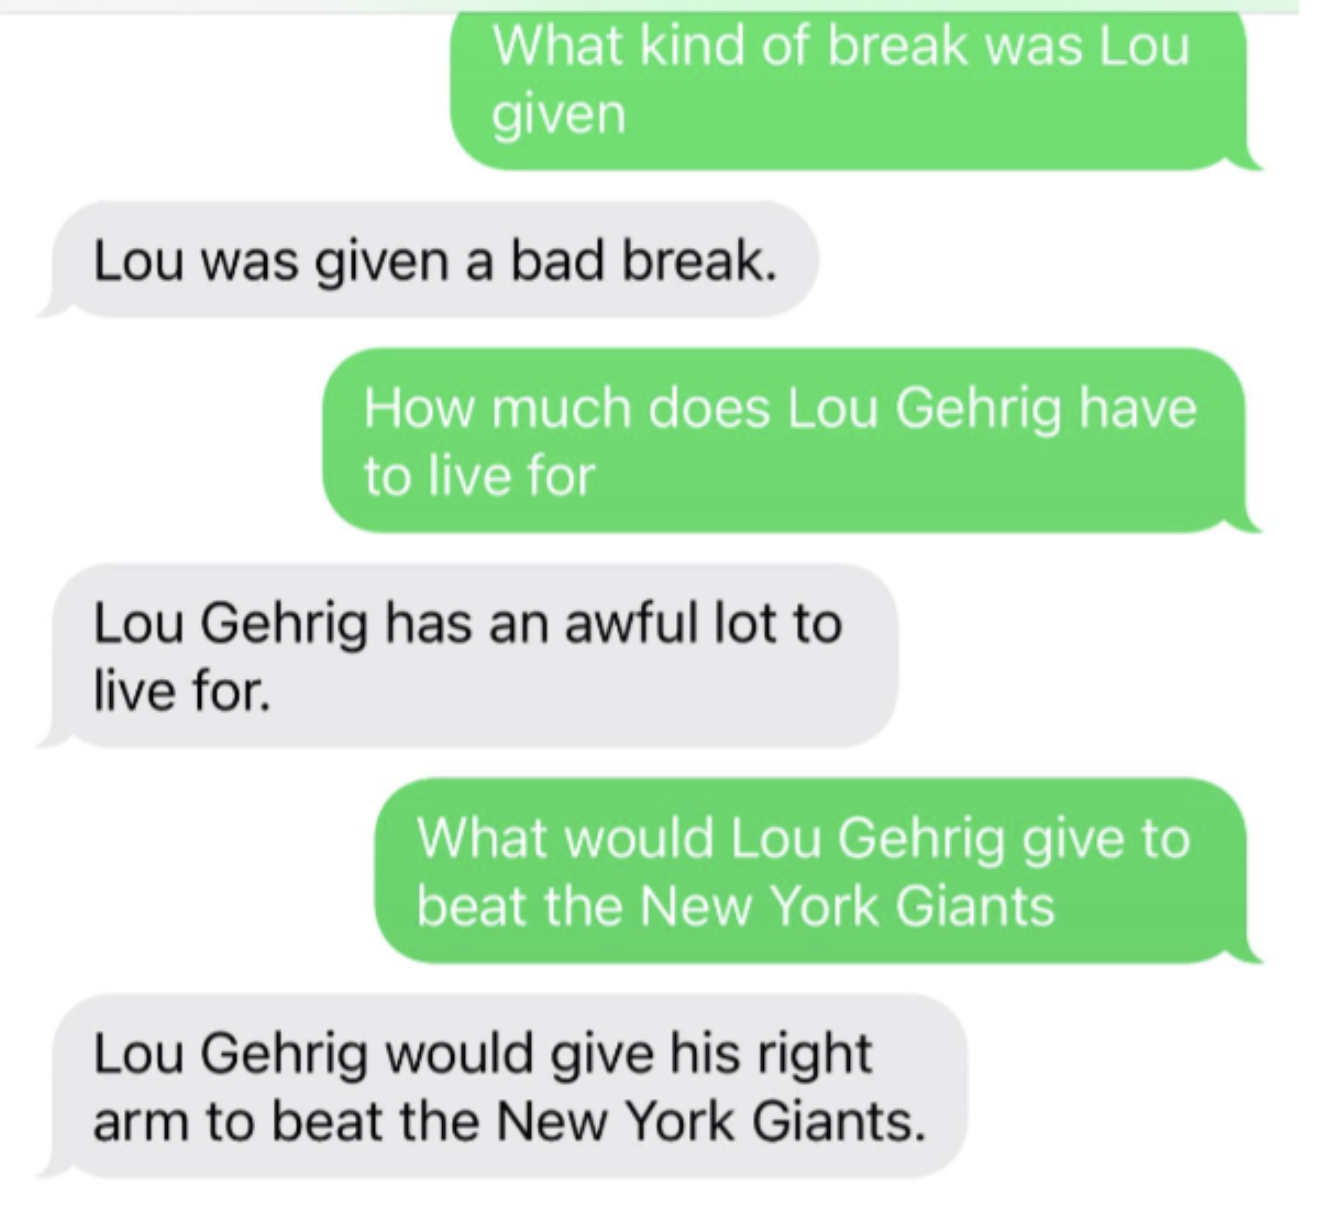 sms example where i ask "what would lou gehrig give to beat the new york giants" and the bot responds with "lou gehrig would give his right arm to beat the New York Giants"